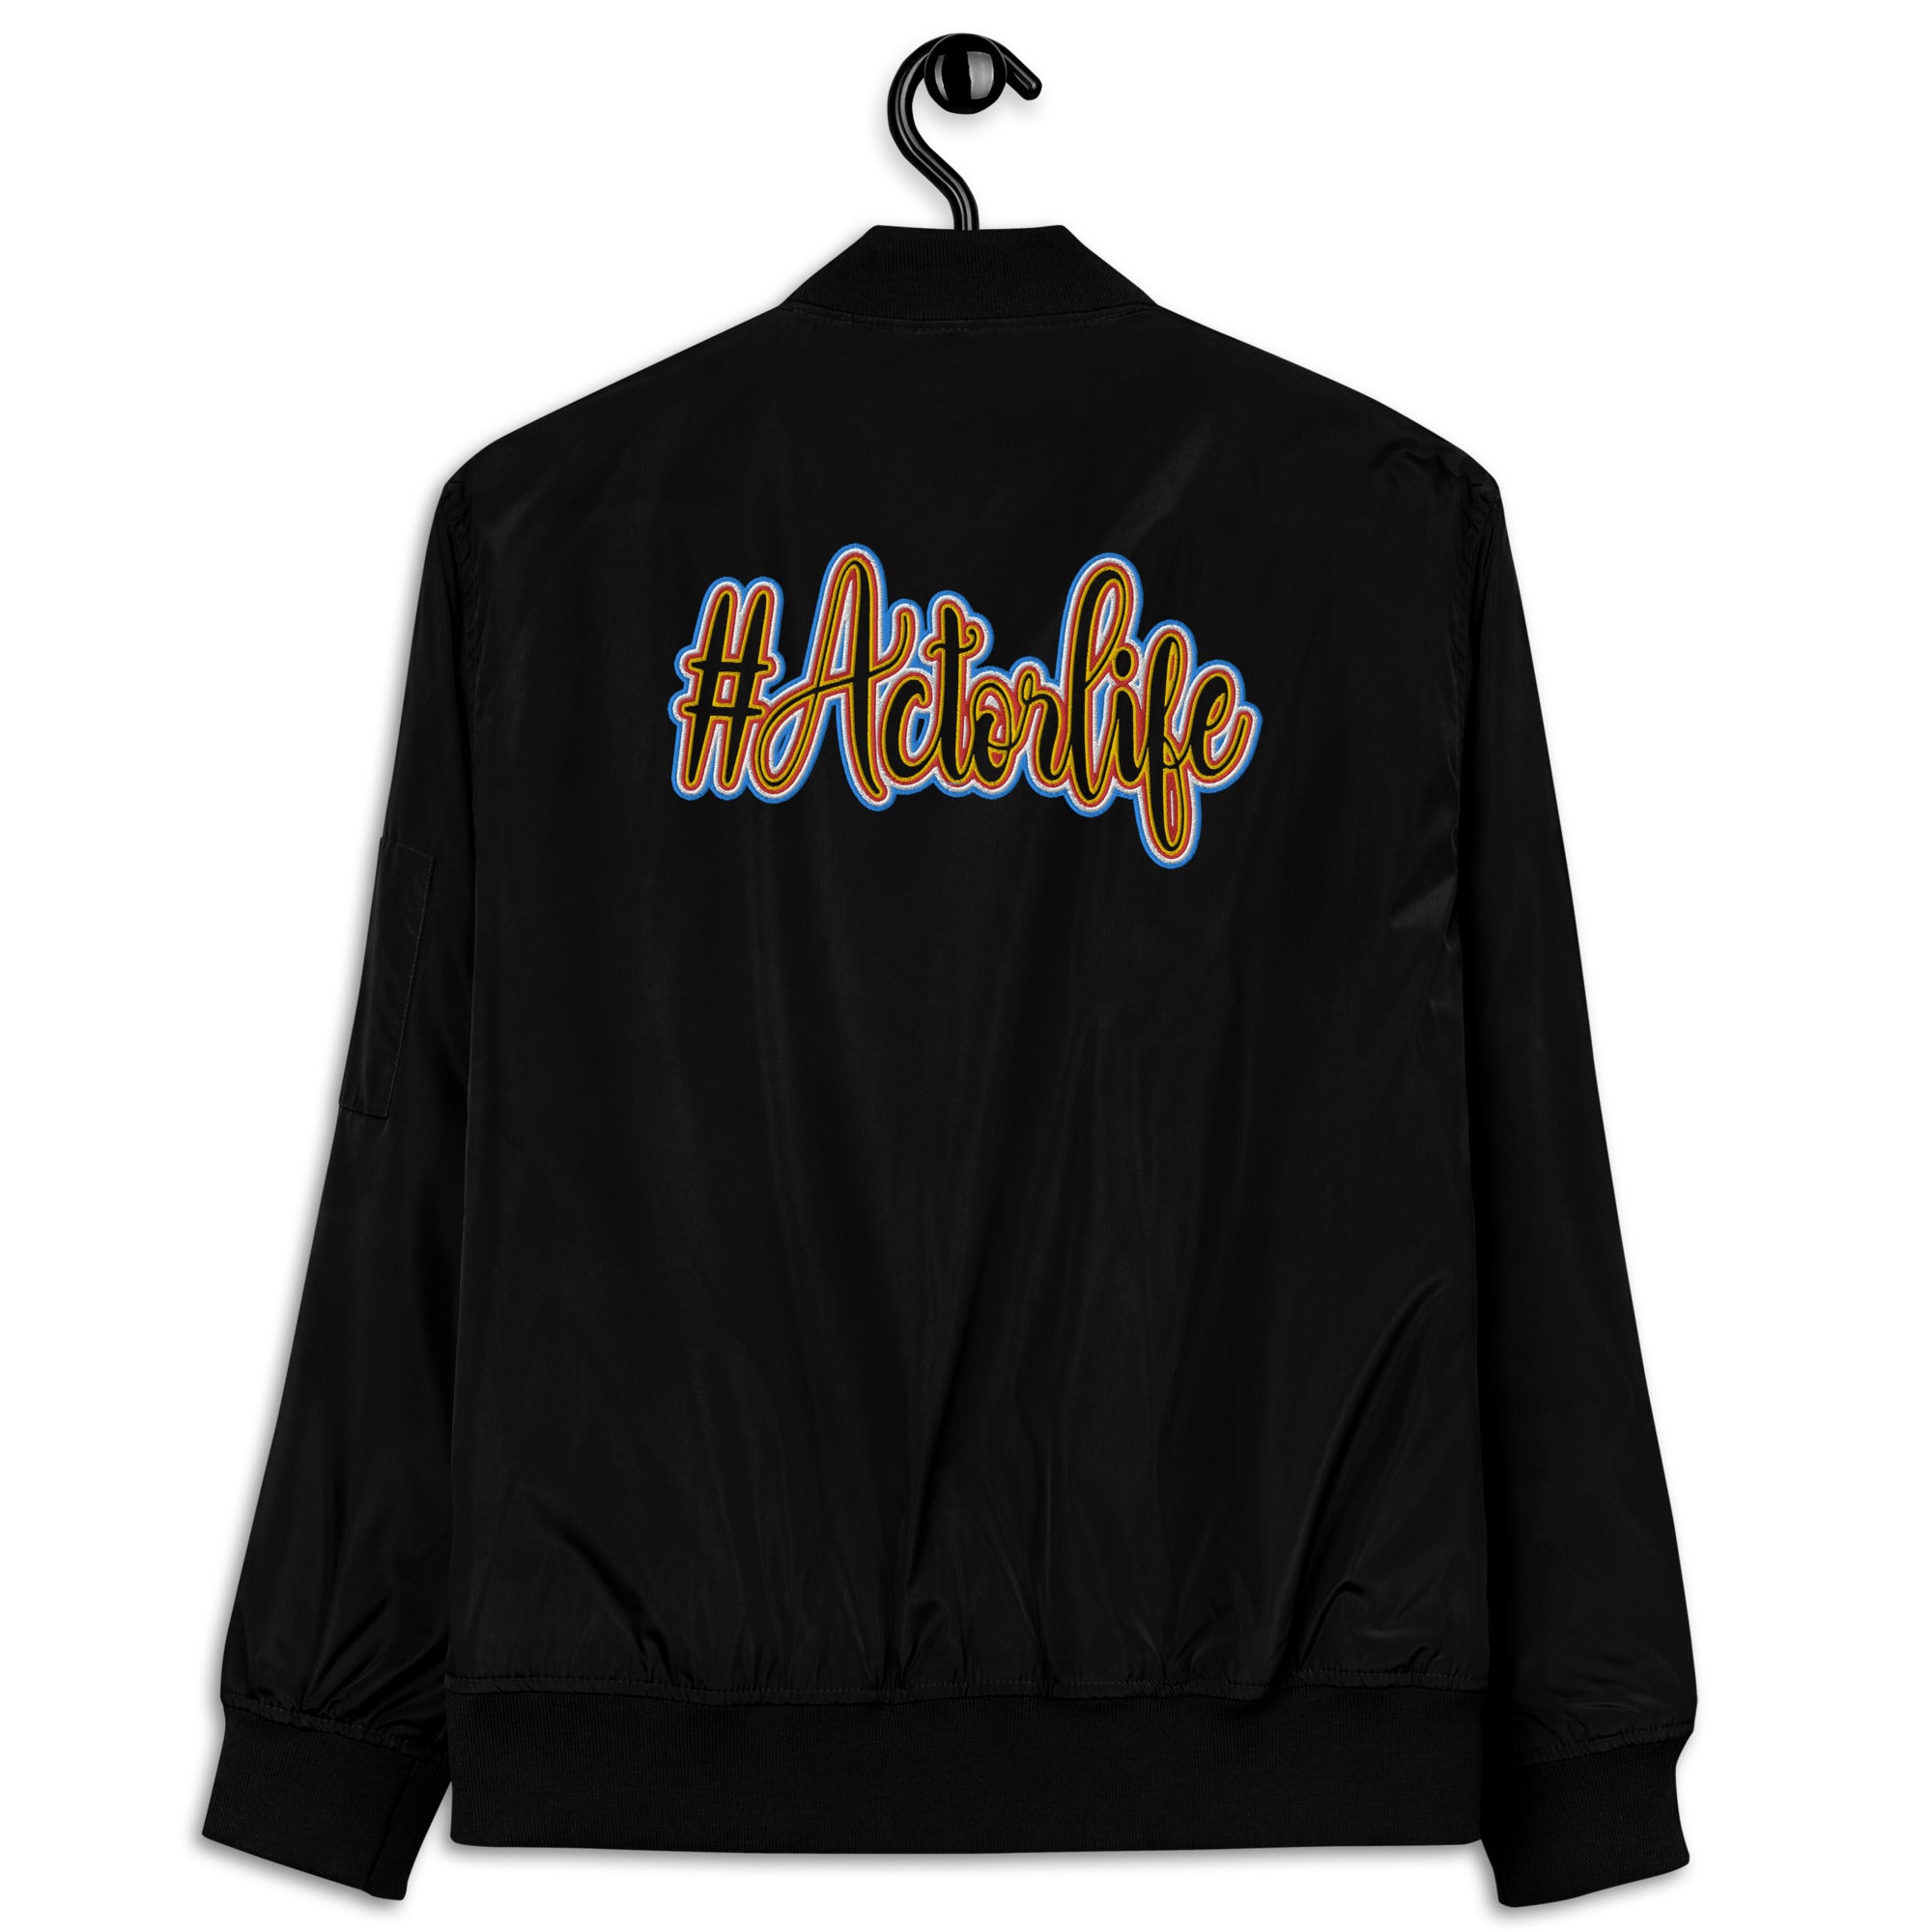 Actorlife Embroidered Colorful Premium recycled bomber jacket